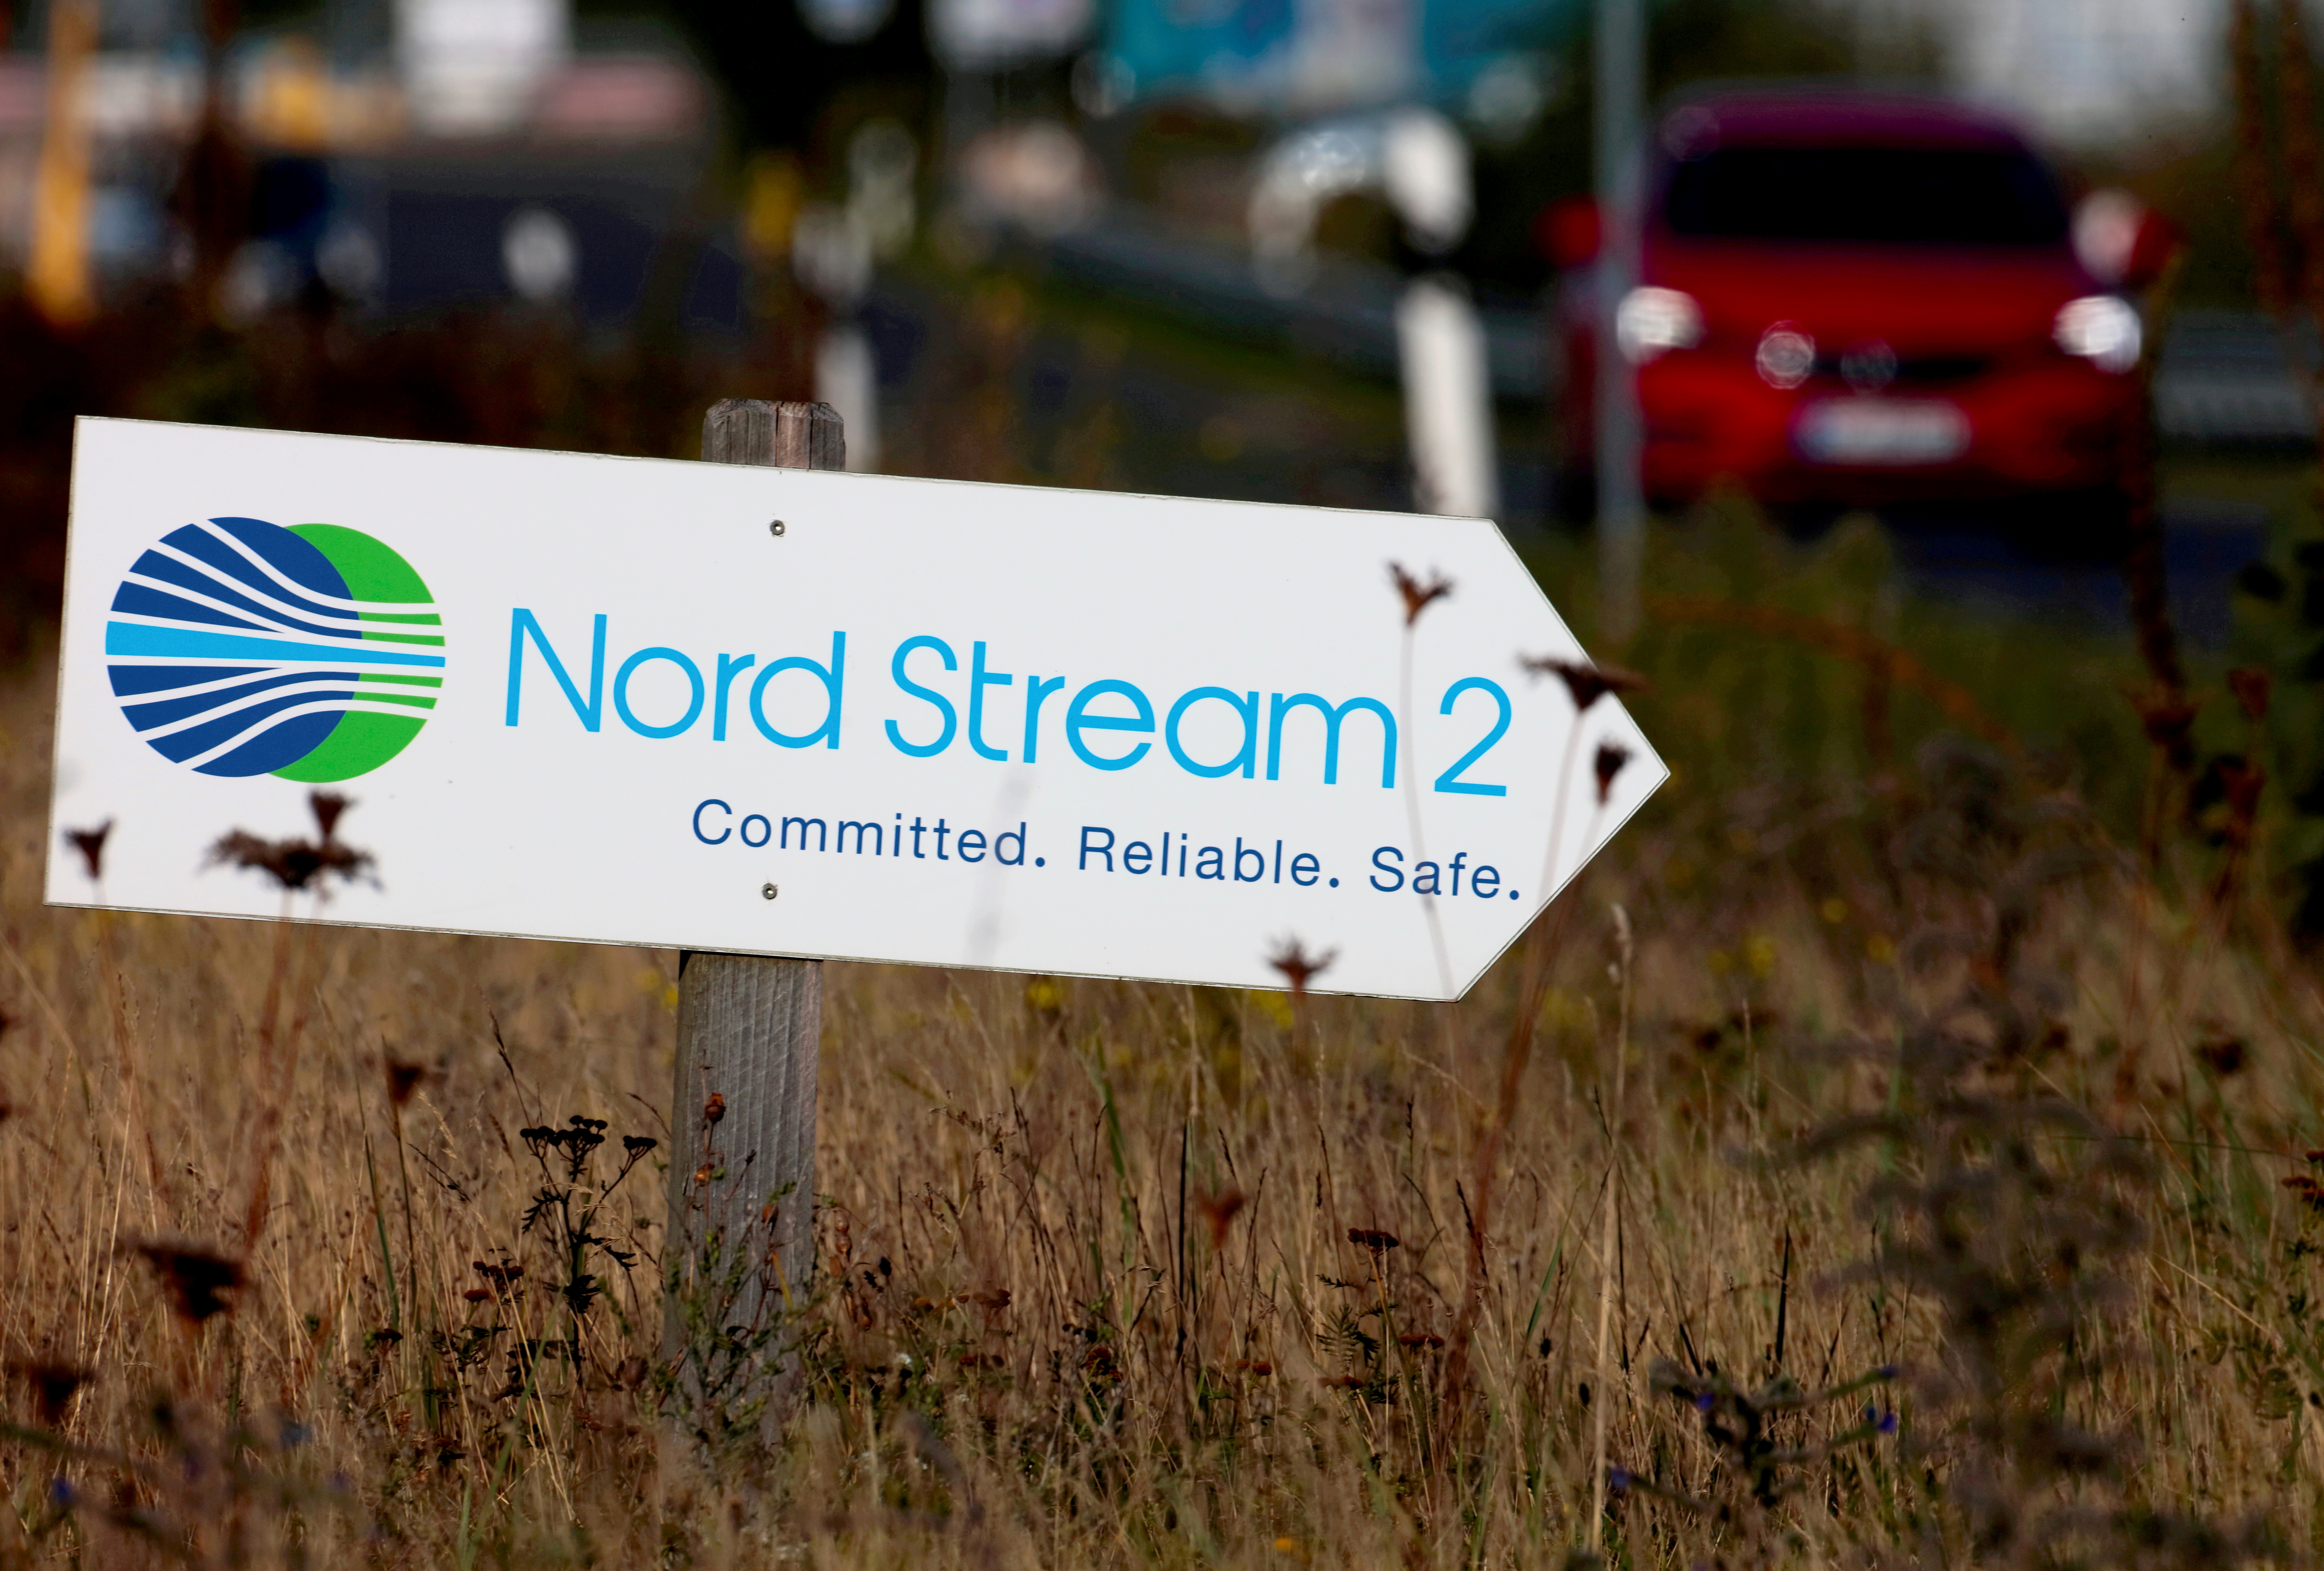 A road sign directs traffic towards the Nord Stream 2 gas line landfall facility entrance in Lubmin, Germany, September 10, 2020.   REUTERS/Hannibal Hanschke/File Photo